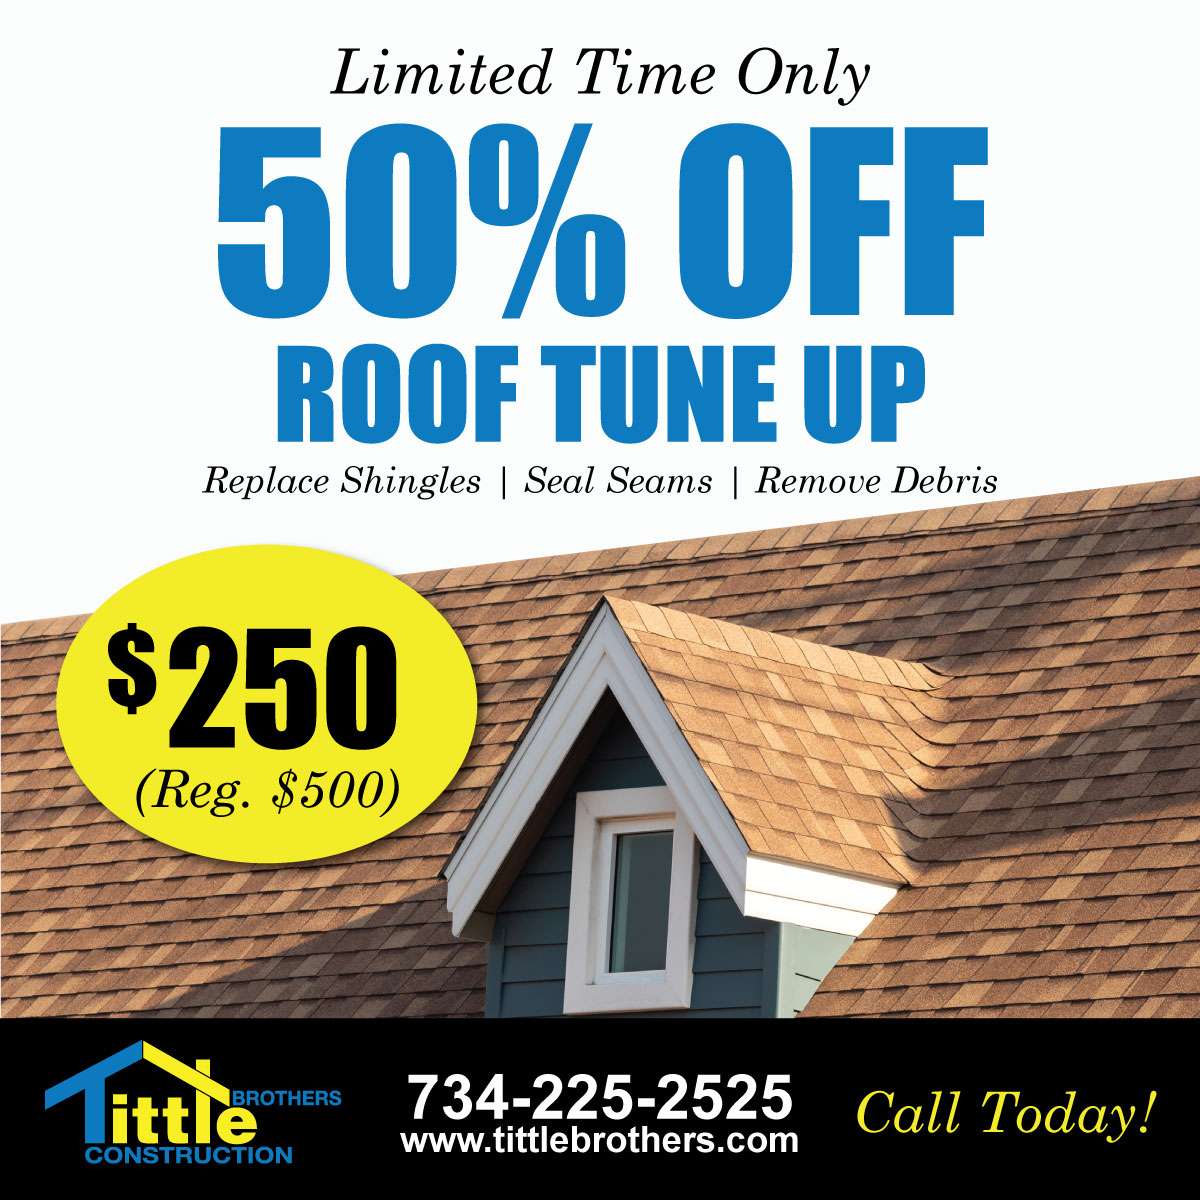 Extend the life of your roof with routine roof tune ups.